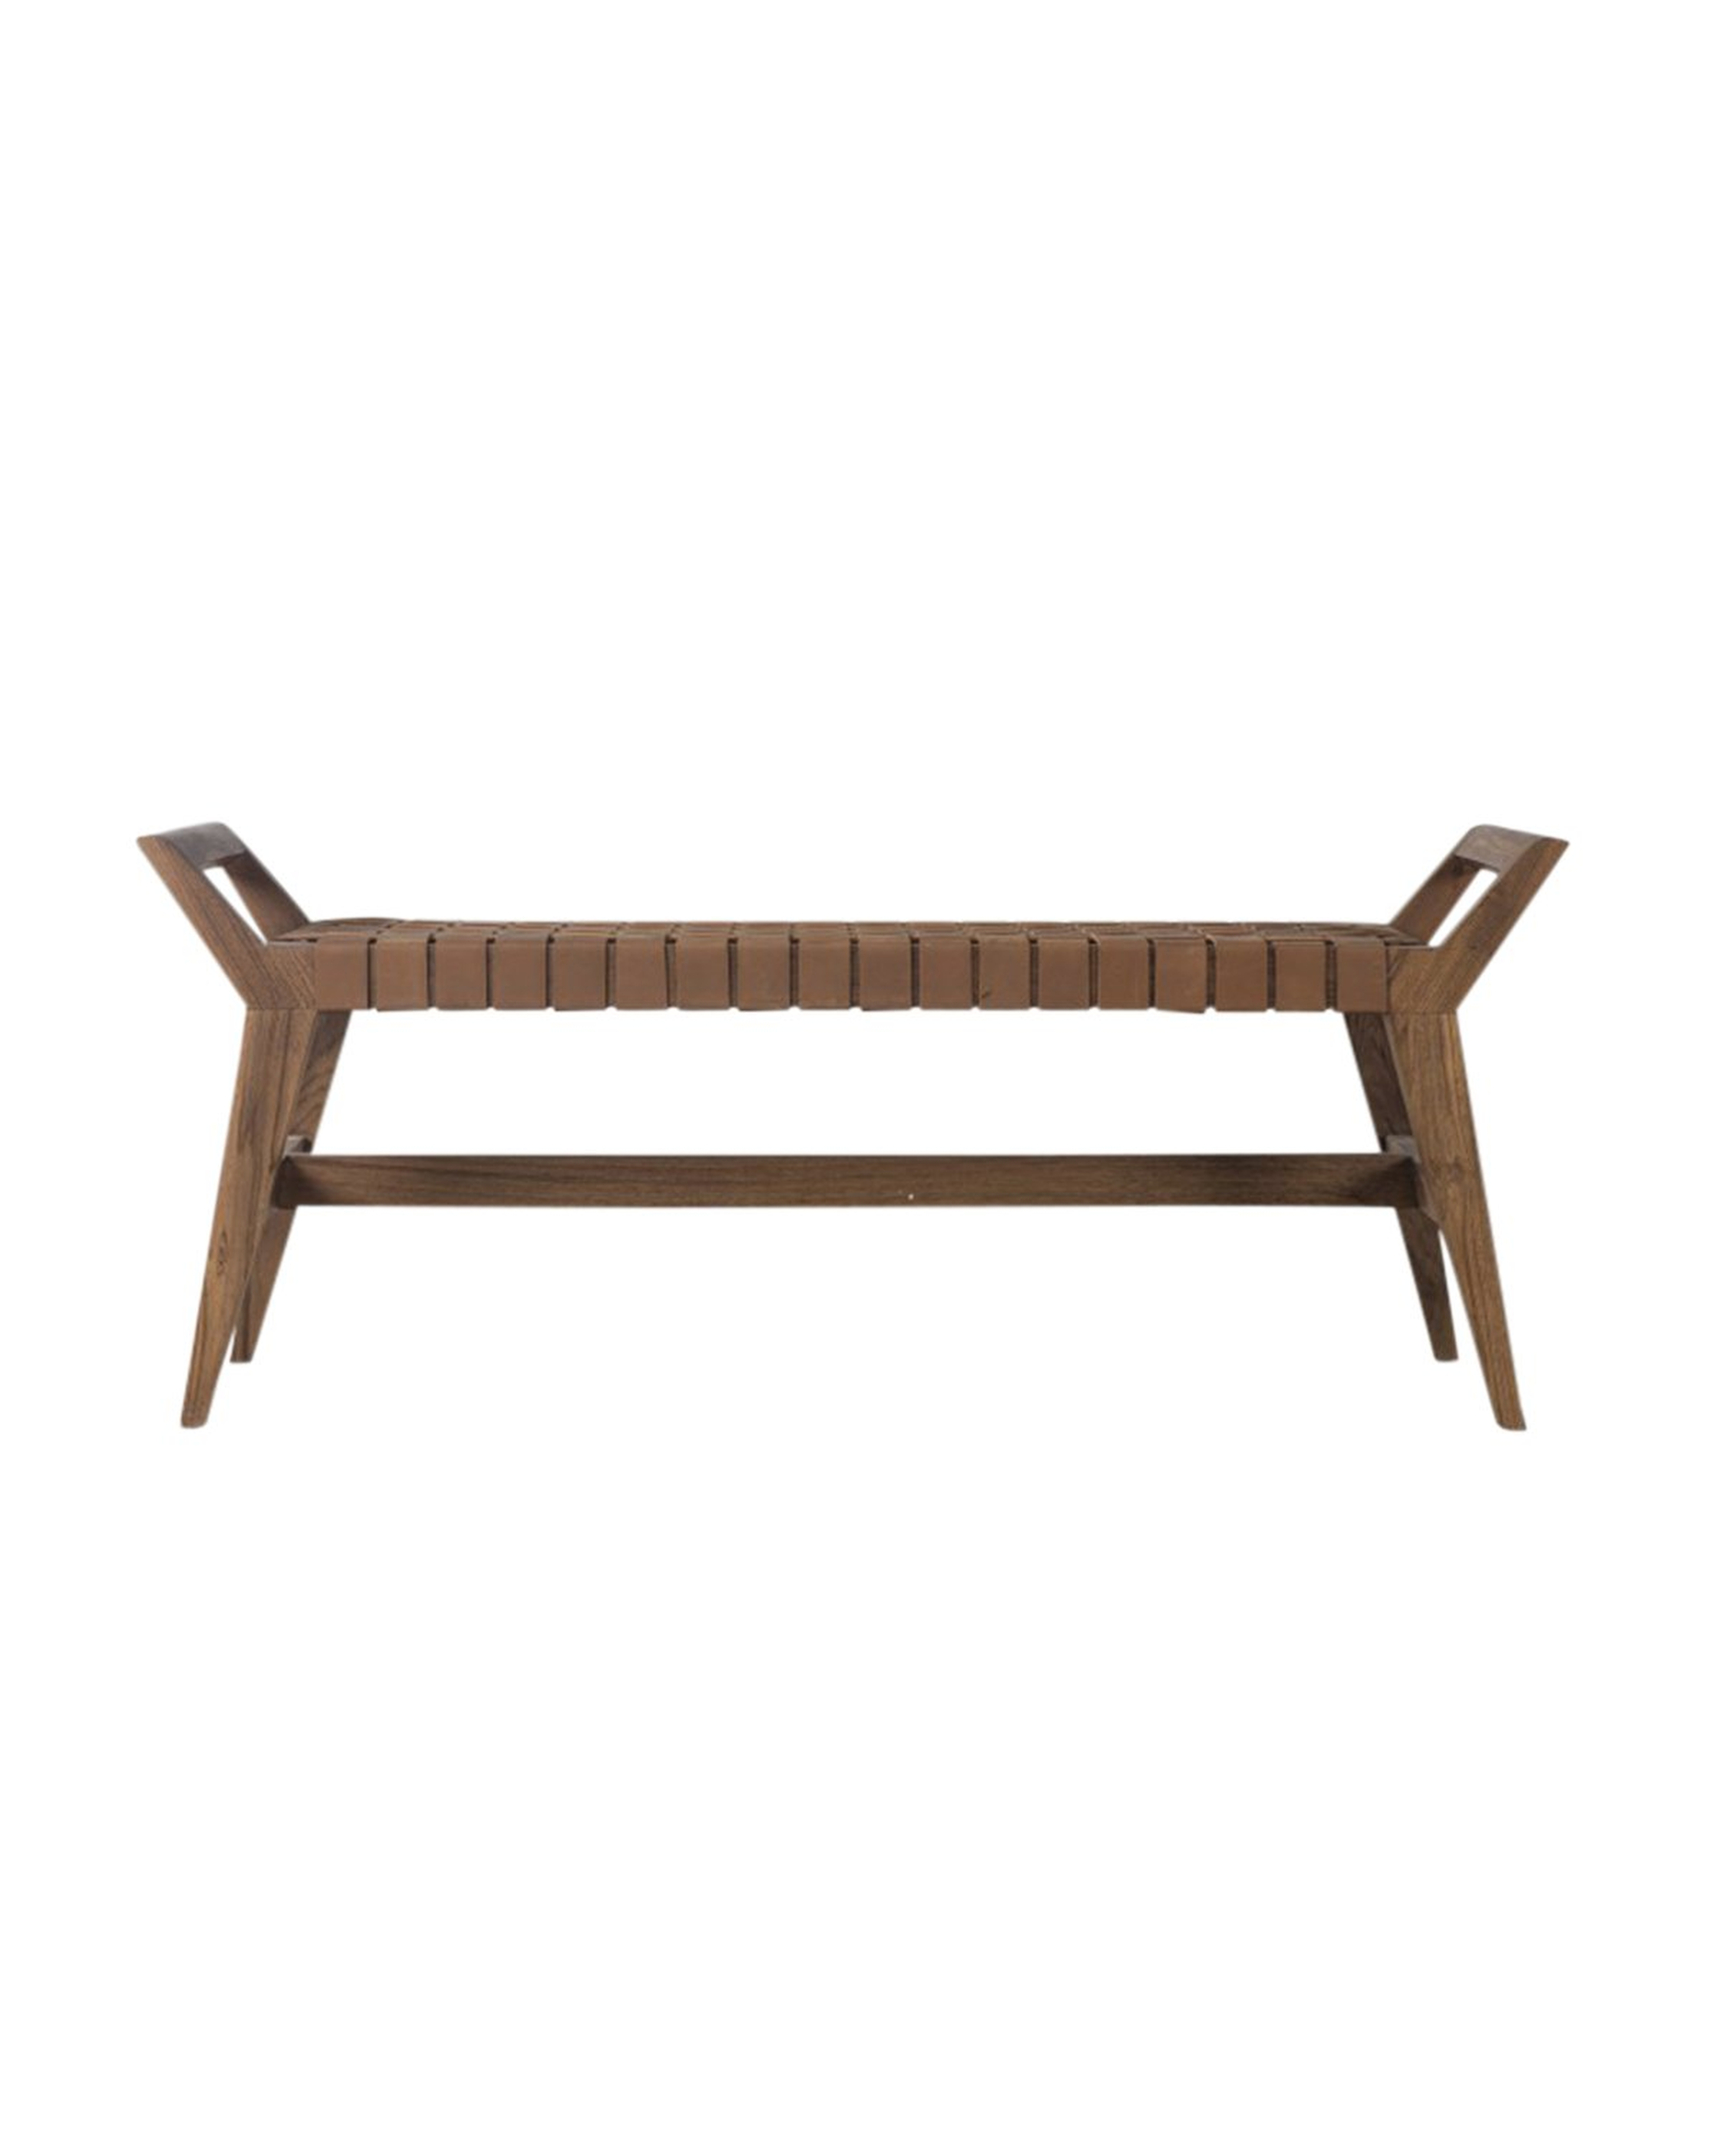 Danielle Leather Bench - McGee & Co.